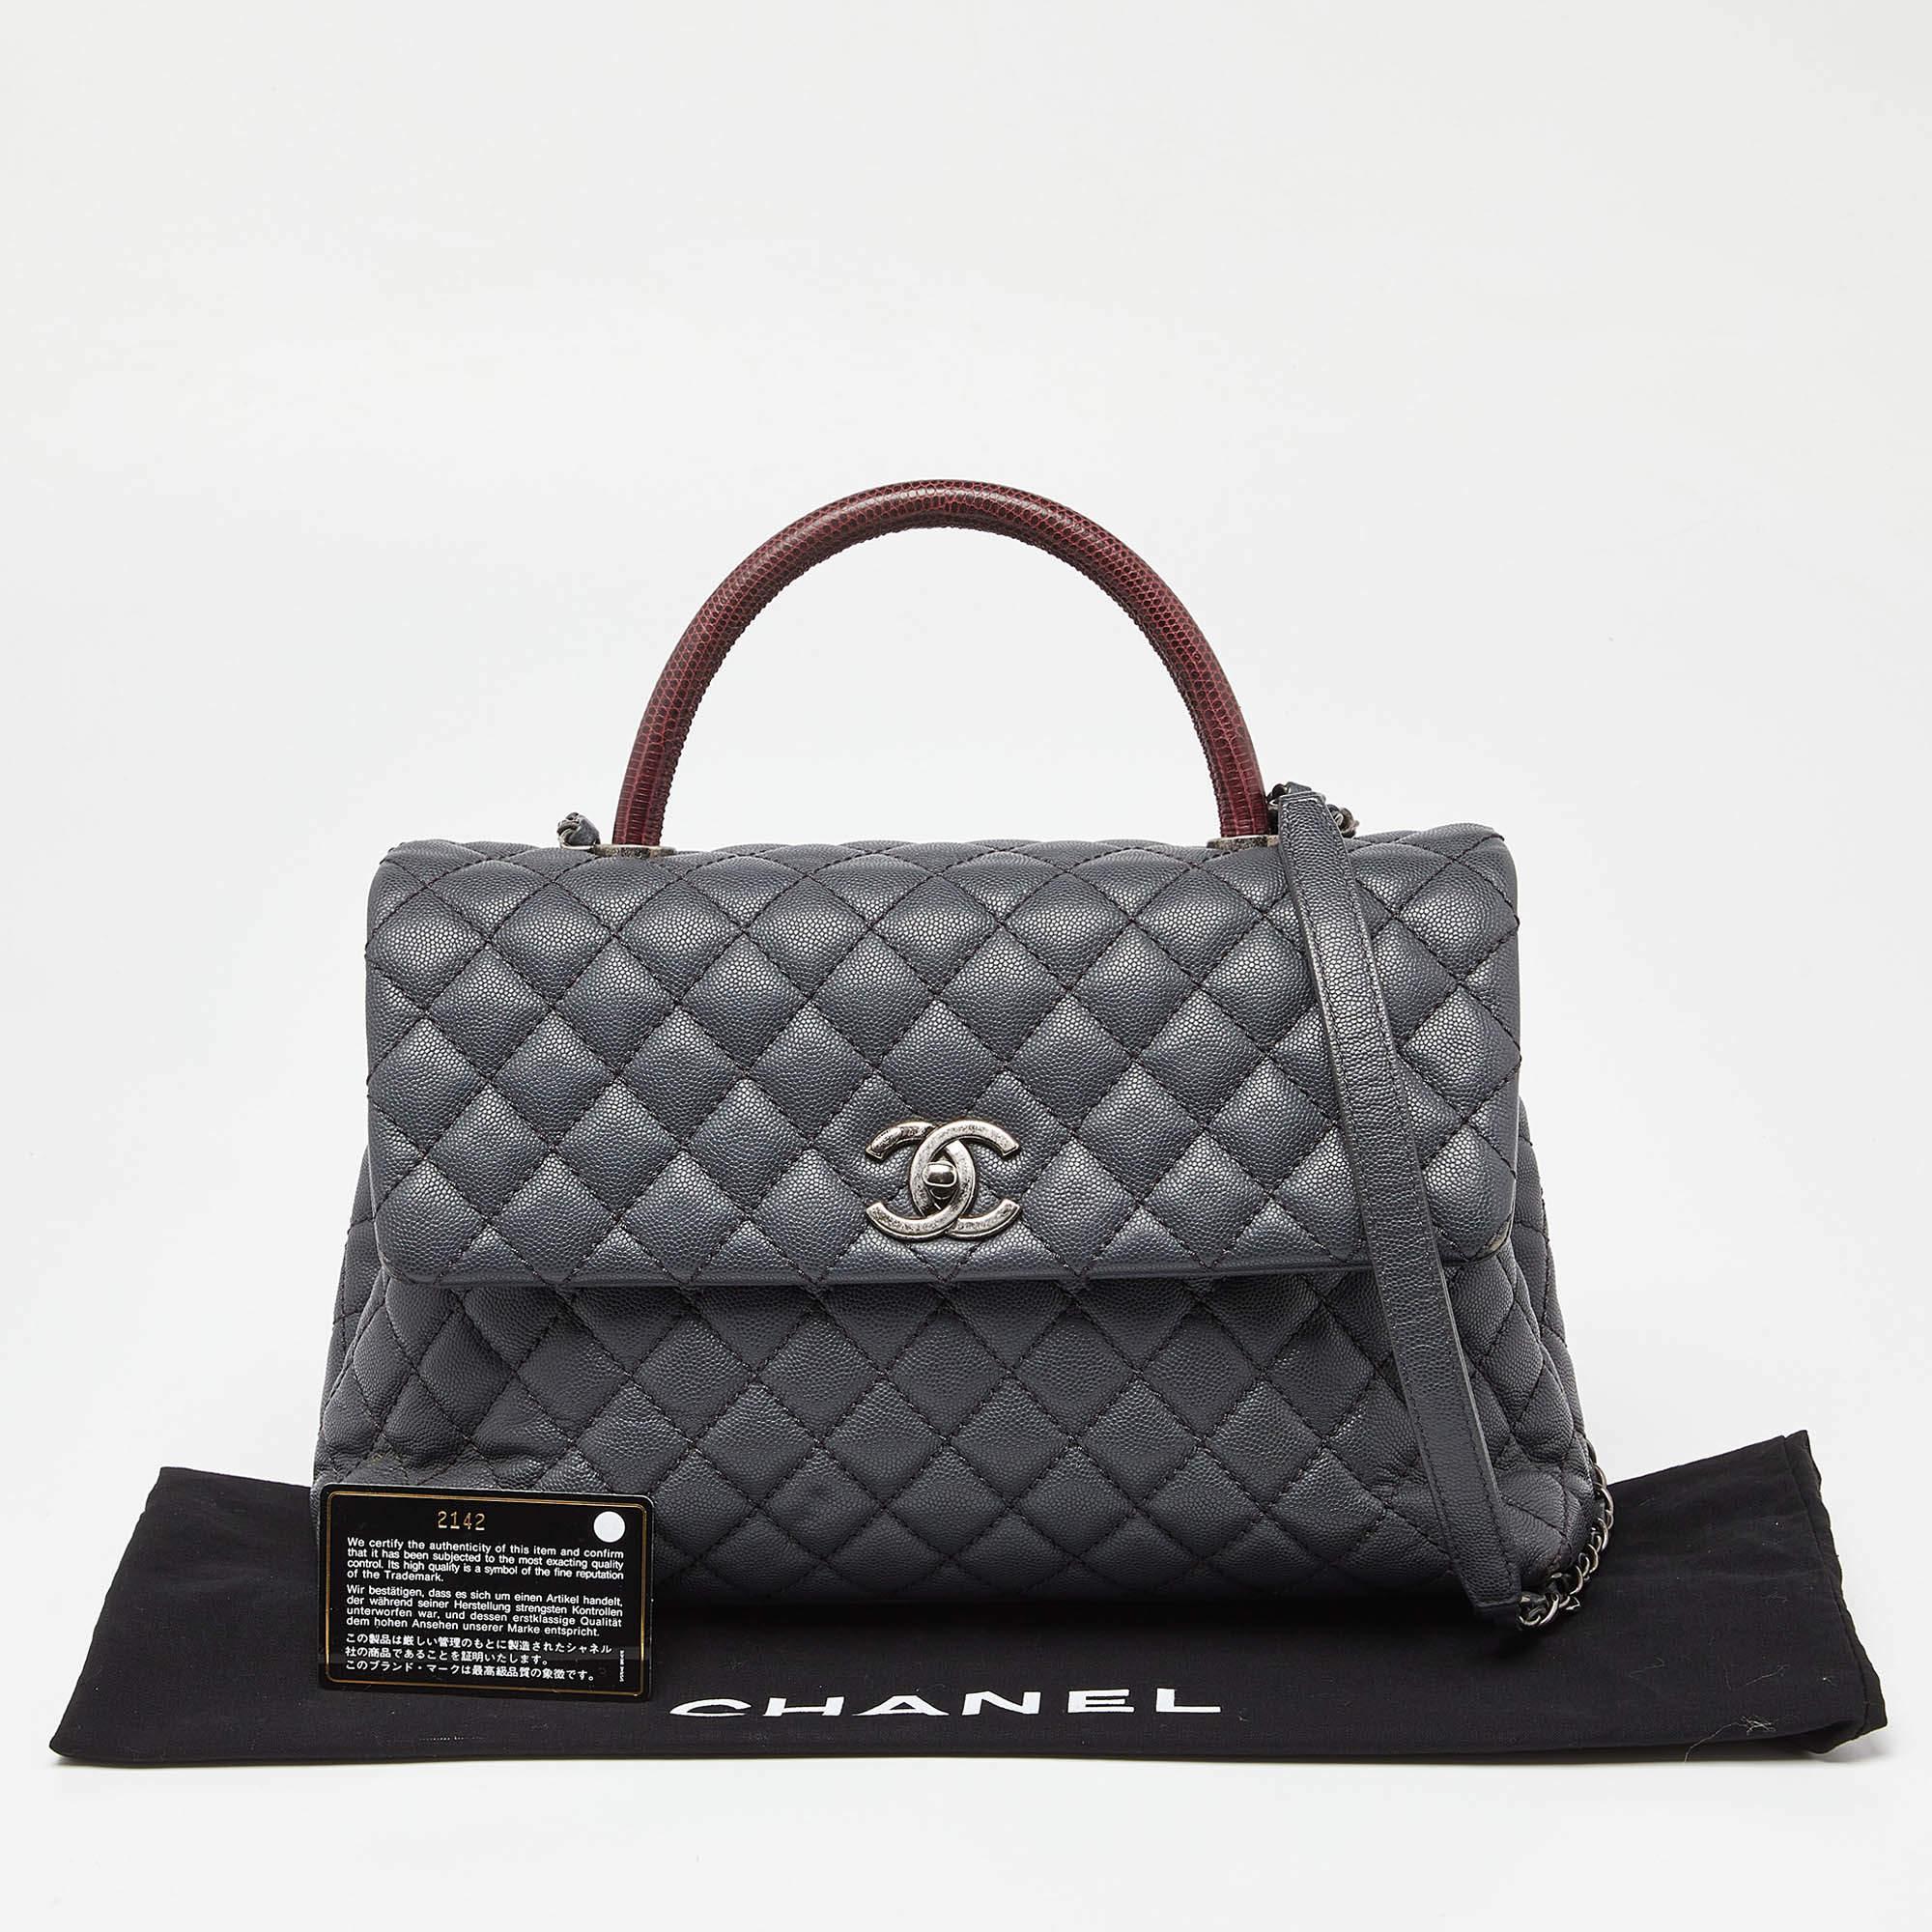 Chanel Grey/Red Caviar Leather and Lizard Leather Medium Coco Top Handle Bag 9